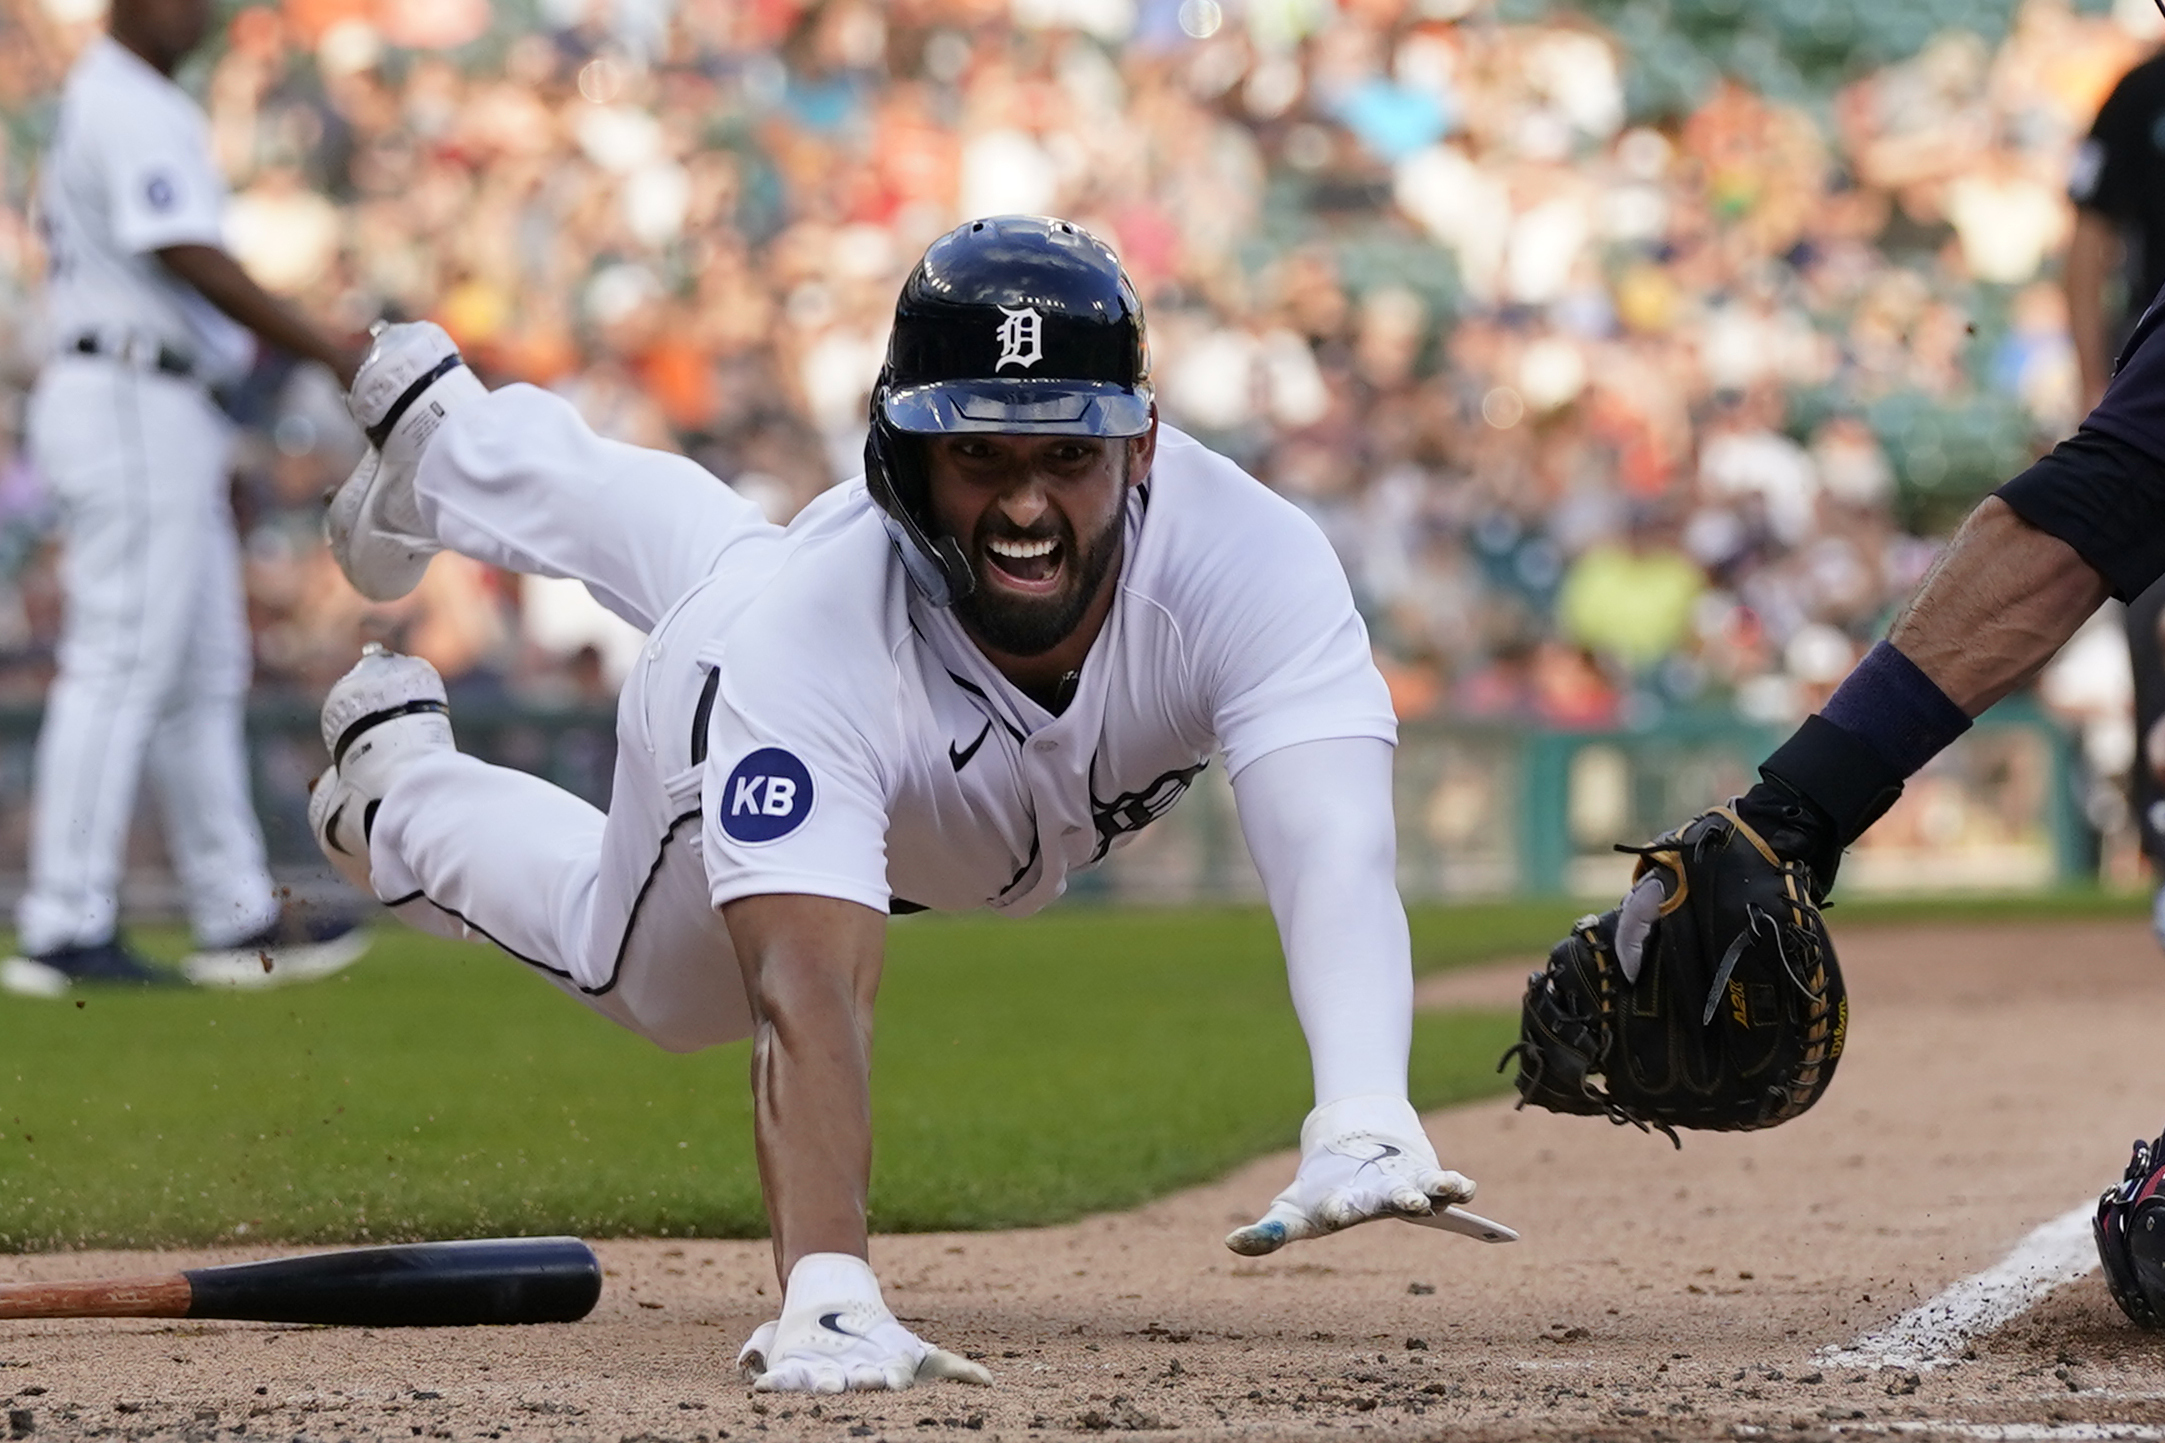 Baddoo and Greene hit HRs, Tigers beat Marlins 5-0 – The Oakland Press